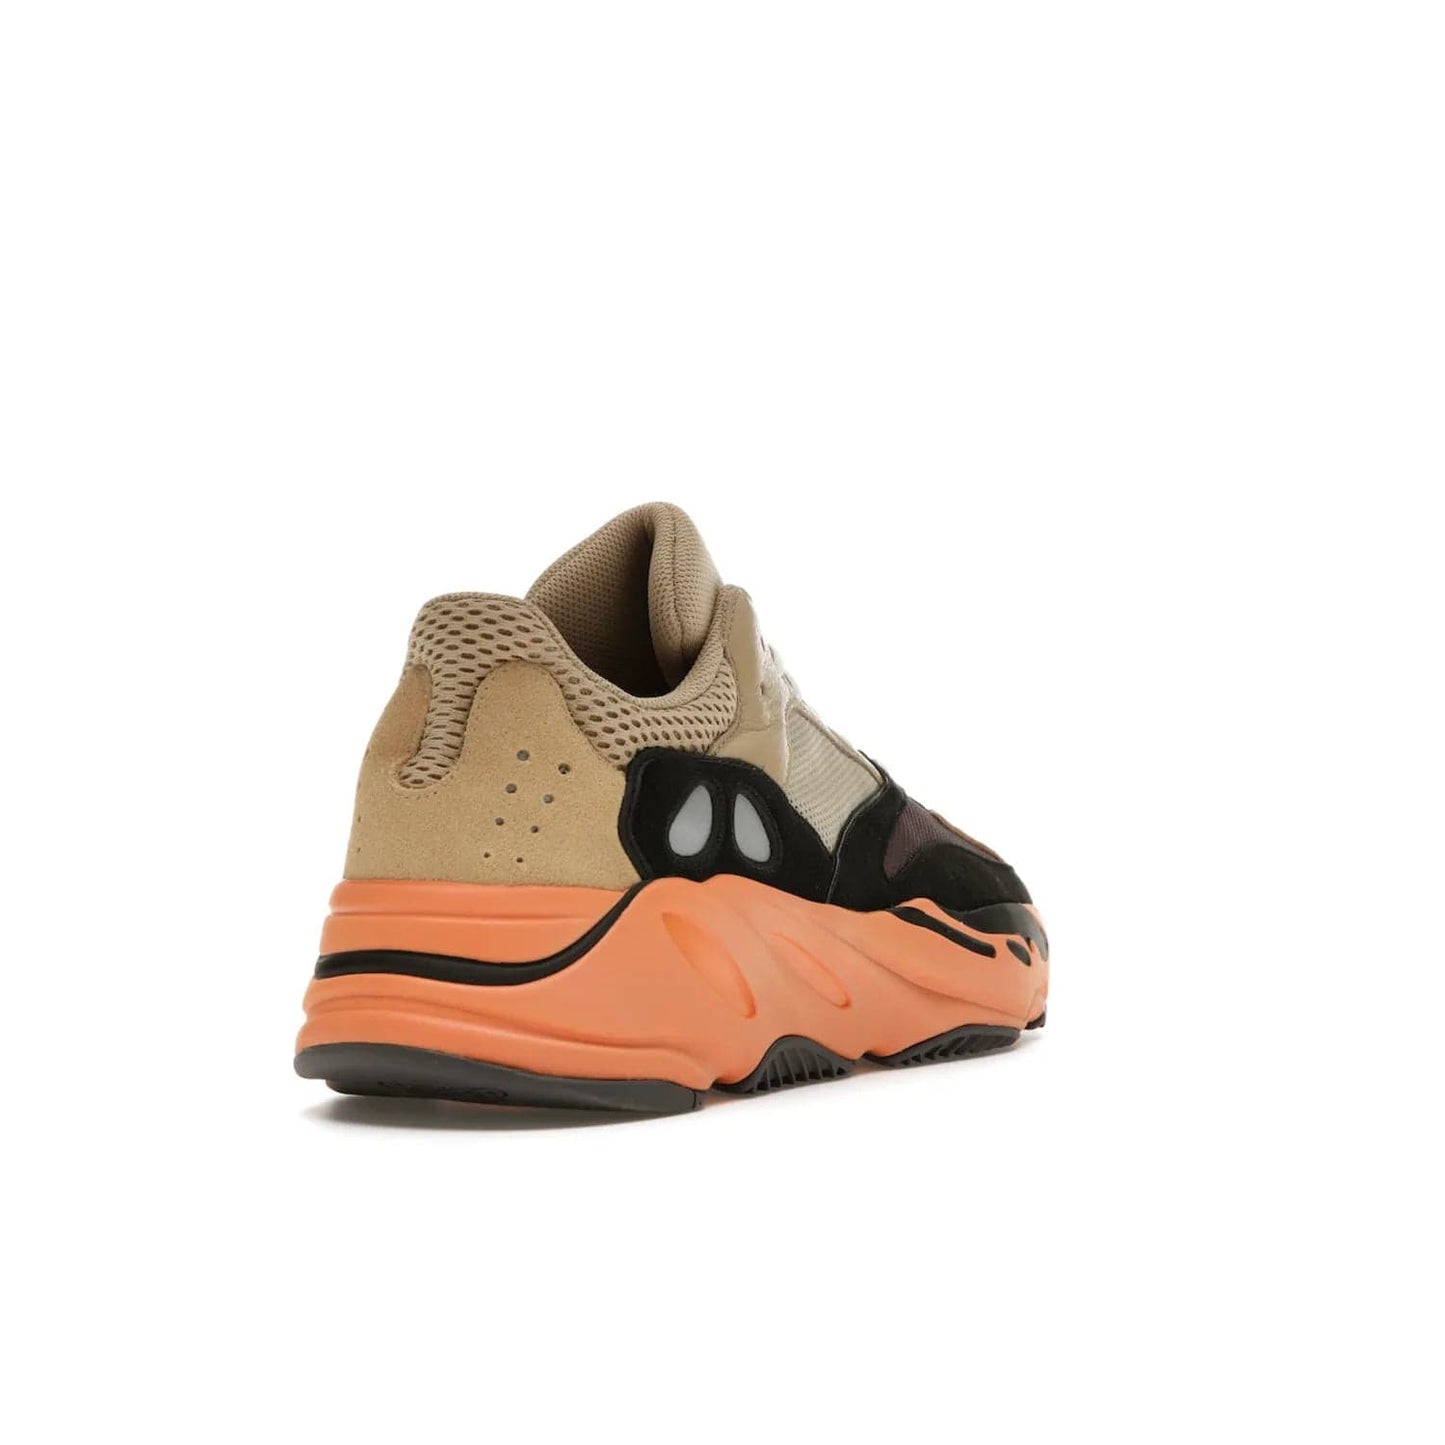 adidas Yeezy Boost 700 Enflame Amber - Image 31 - Only at www.BallersClubKickz.com - Adidas Yeezy Boost 700 Enflame Amber: Eye-catching design with pale yellow, brown, teal, and orange! Get yours in June 2021.